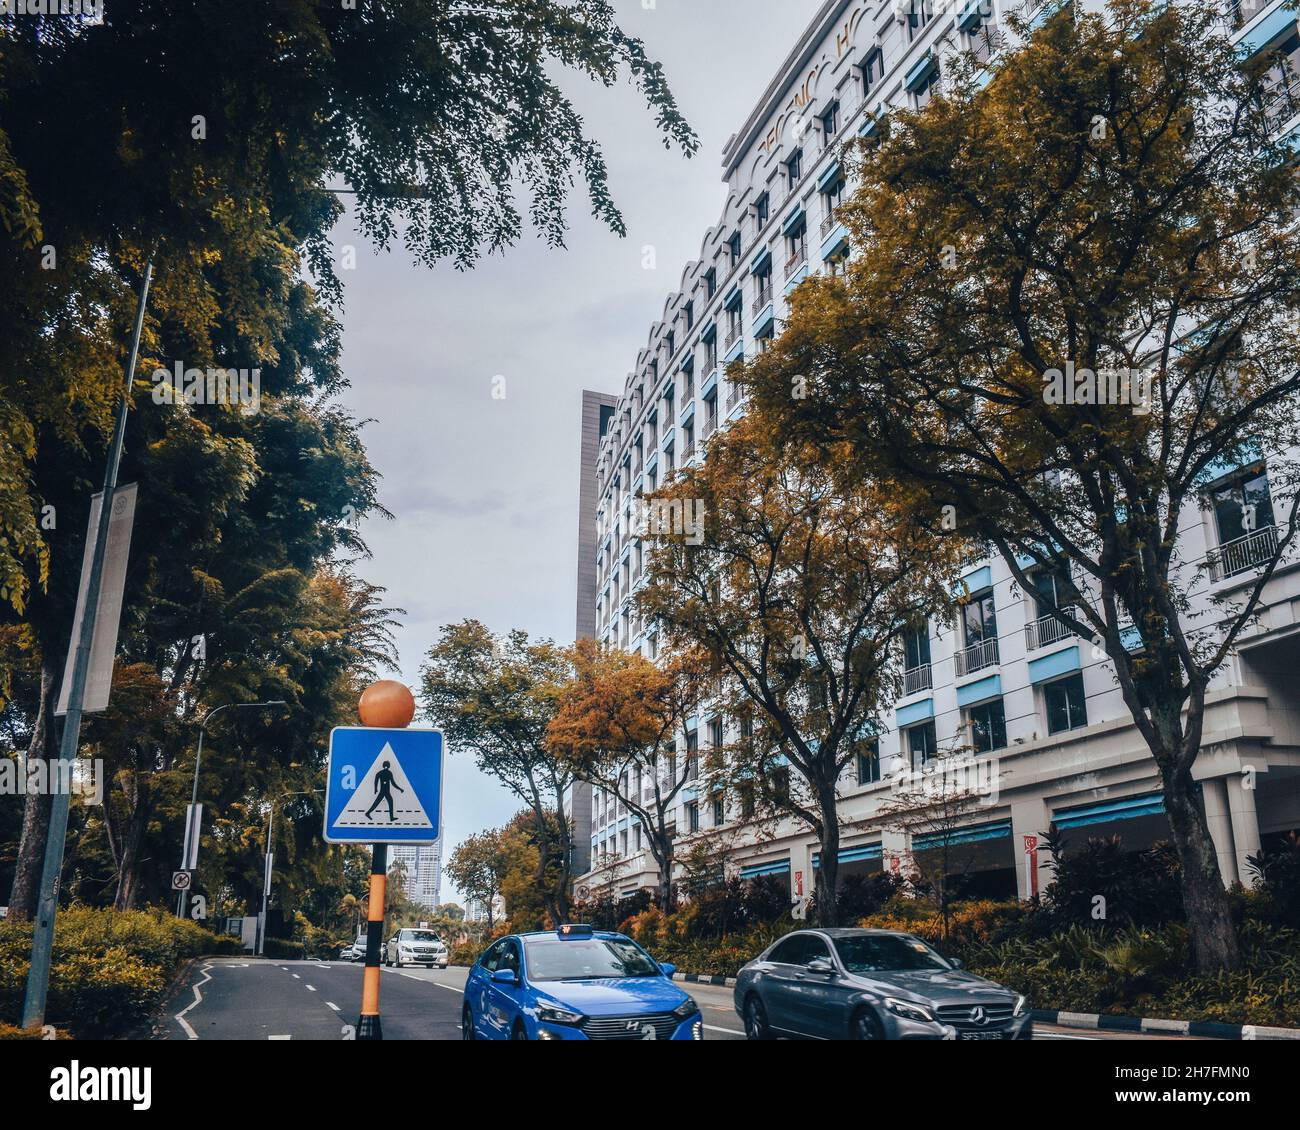 DHOBY GHAUT, SINGAPORE - Aug 28, 2021: The streets of Singapore with tall business buildings in autumn Stock Photo